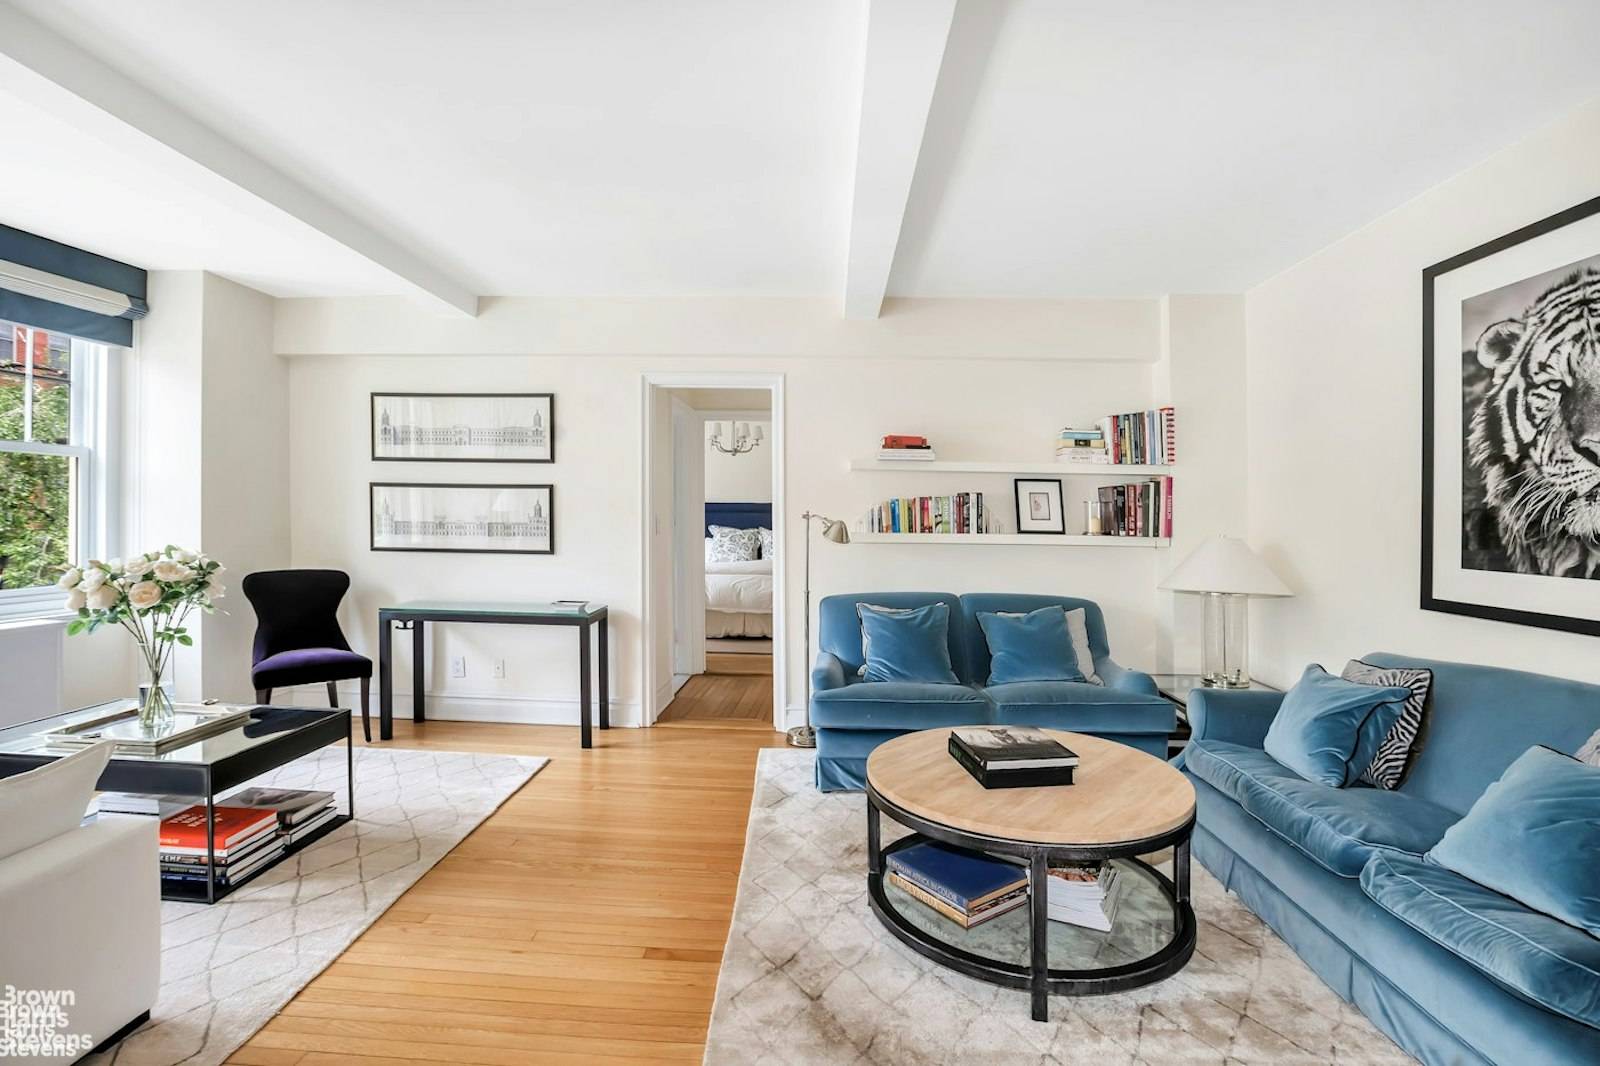 A spacious two bedroom, two bathroom captivating condominium apartment is now available in one of the most desirable pre war buildings in the West Village.